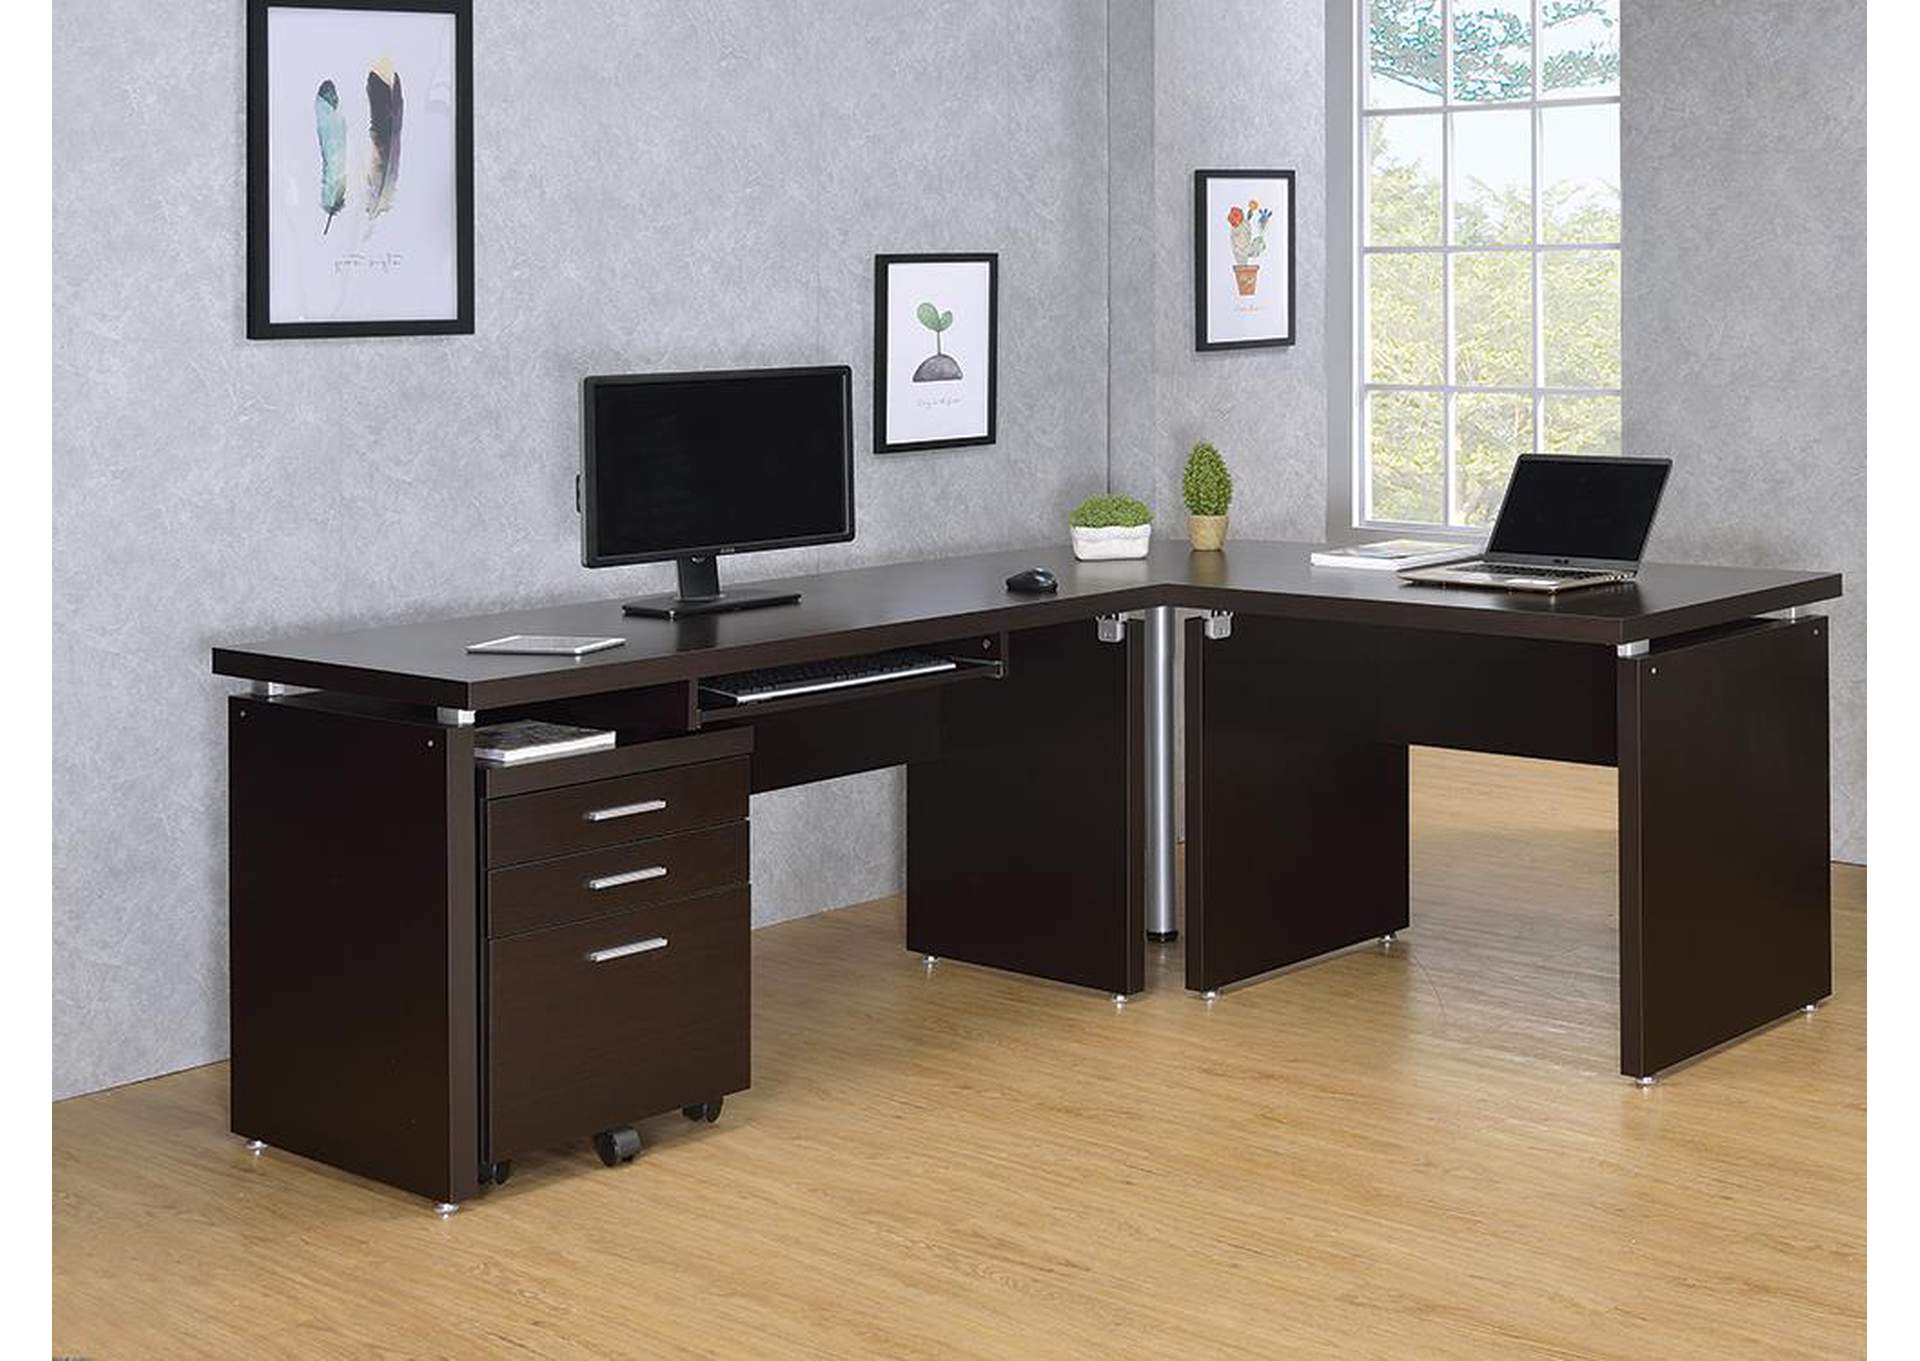 Skylar Computer Desk with Keyboard Drawer Cappuccino,Coaster Furniture